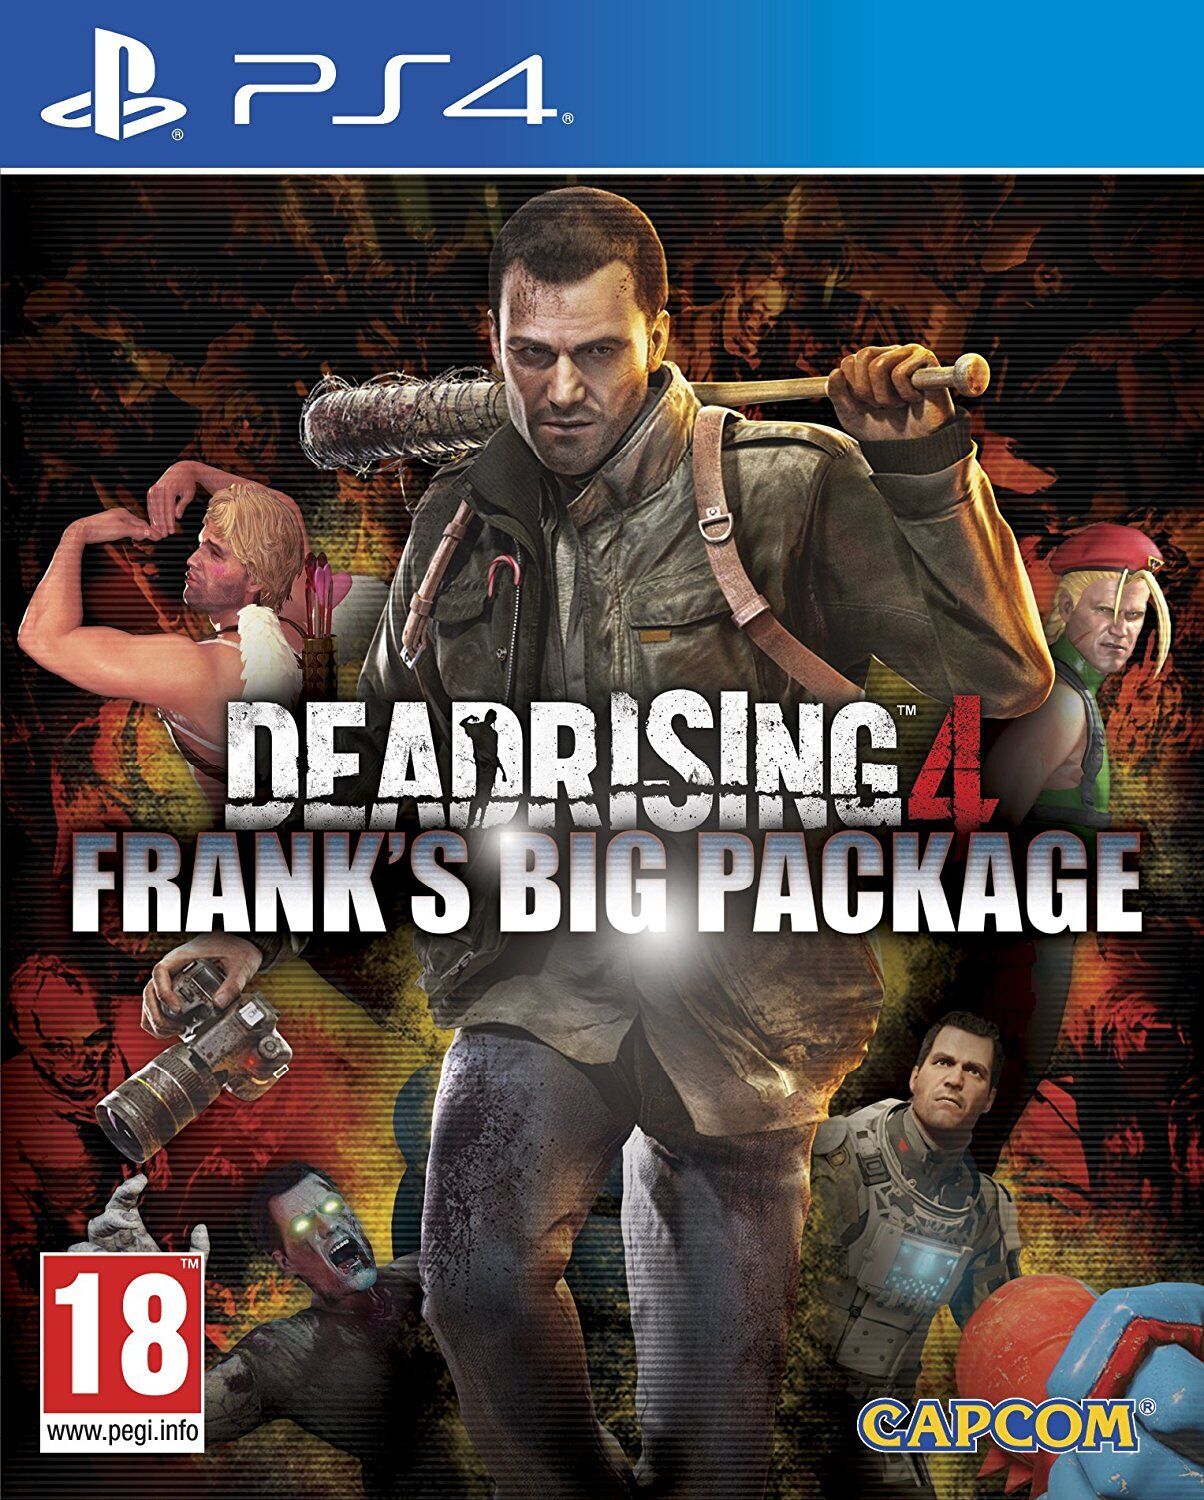 Dead Rising 4 Franks Big Package PlayStation 4 Game.